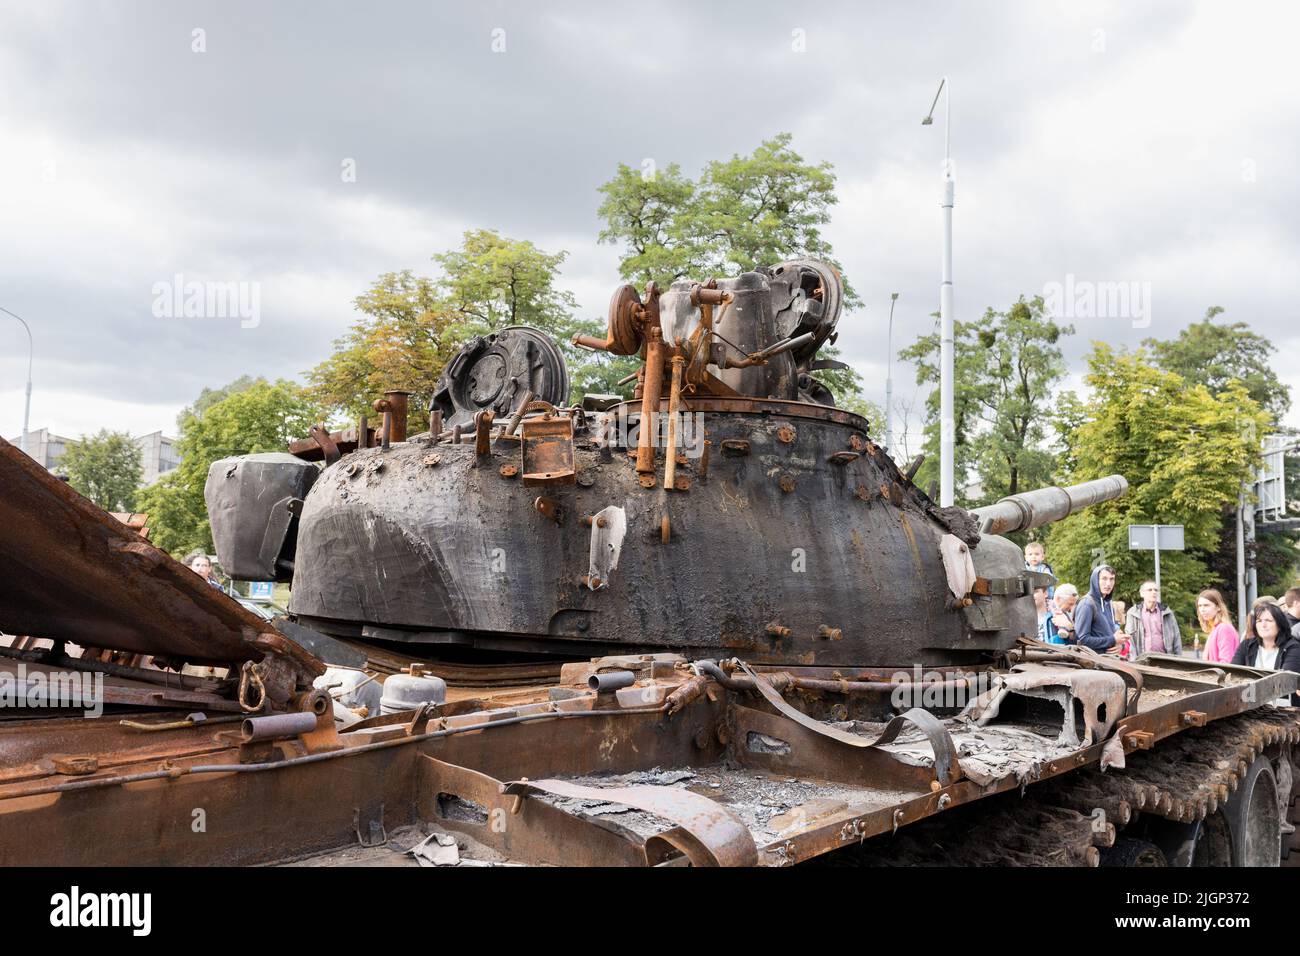 WROCŁAW, POLAND - JULY 12, 2022: Destroyed Russian military equipment exposition 'For your and our freedom' in Wrocław, T-72BA tank turret Stock Photo